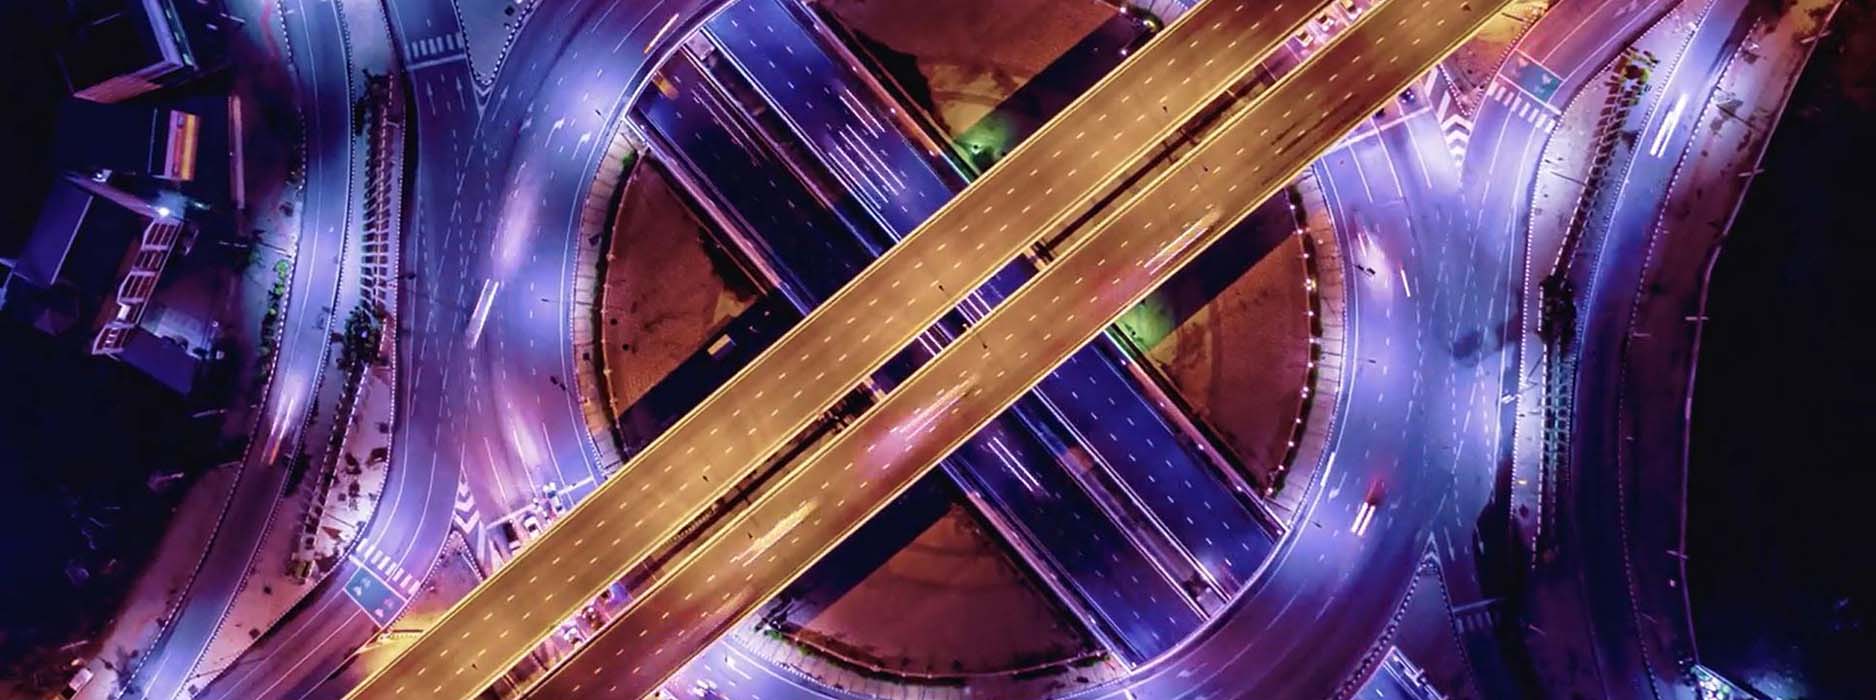 Timelapse Roundabout Traffic cover image